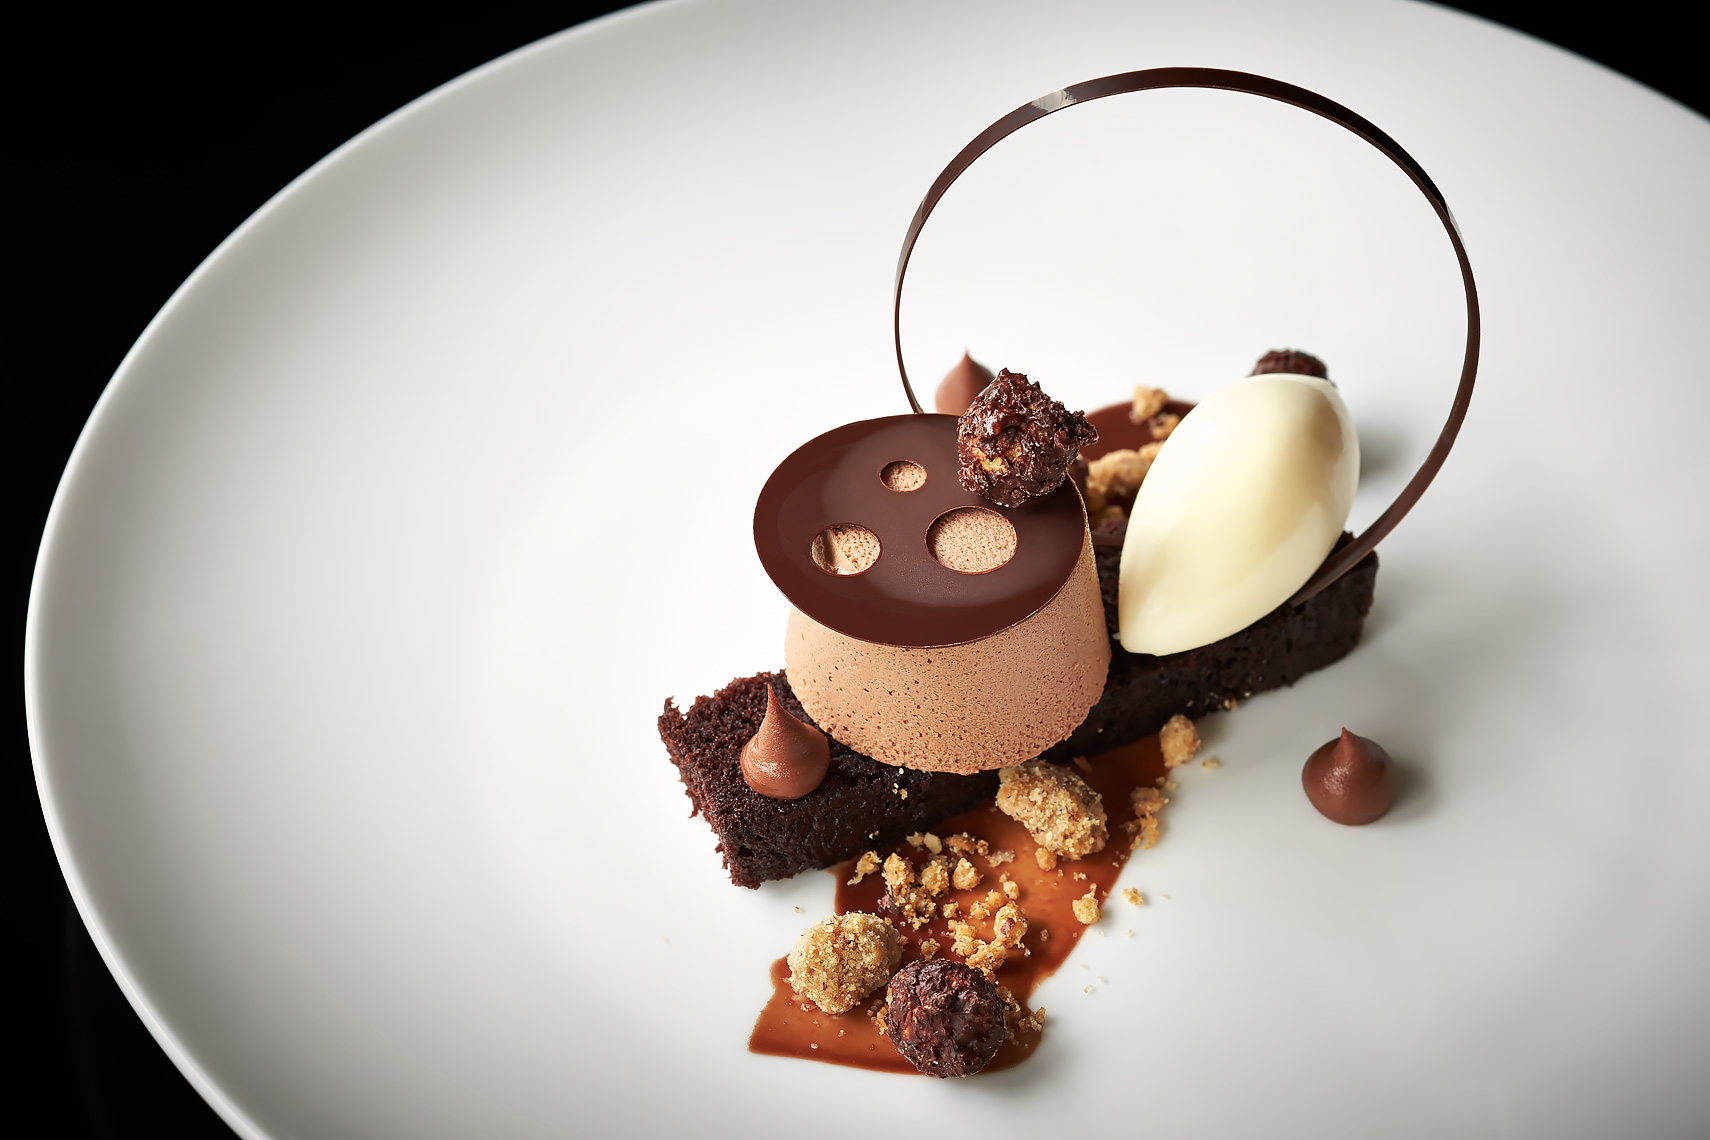 FOOD-Desserts30-Capella-Grill-Room-Chocolate-Mouse